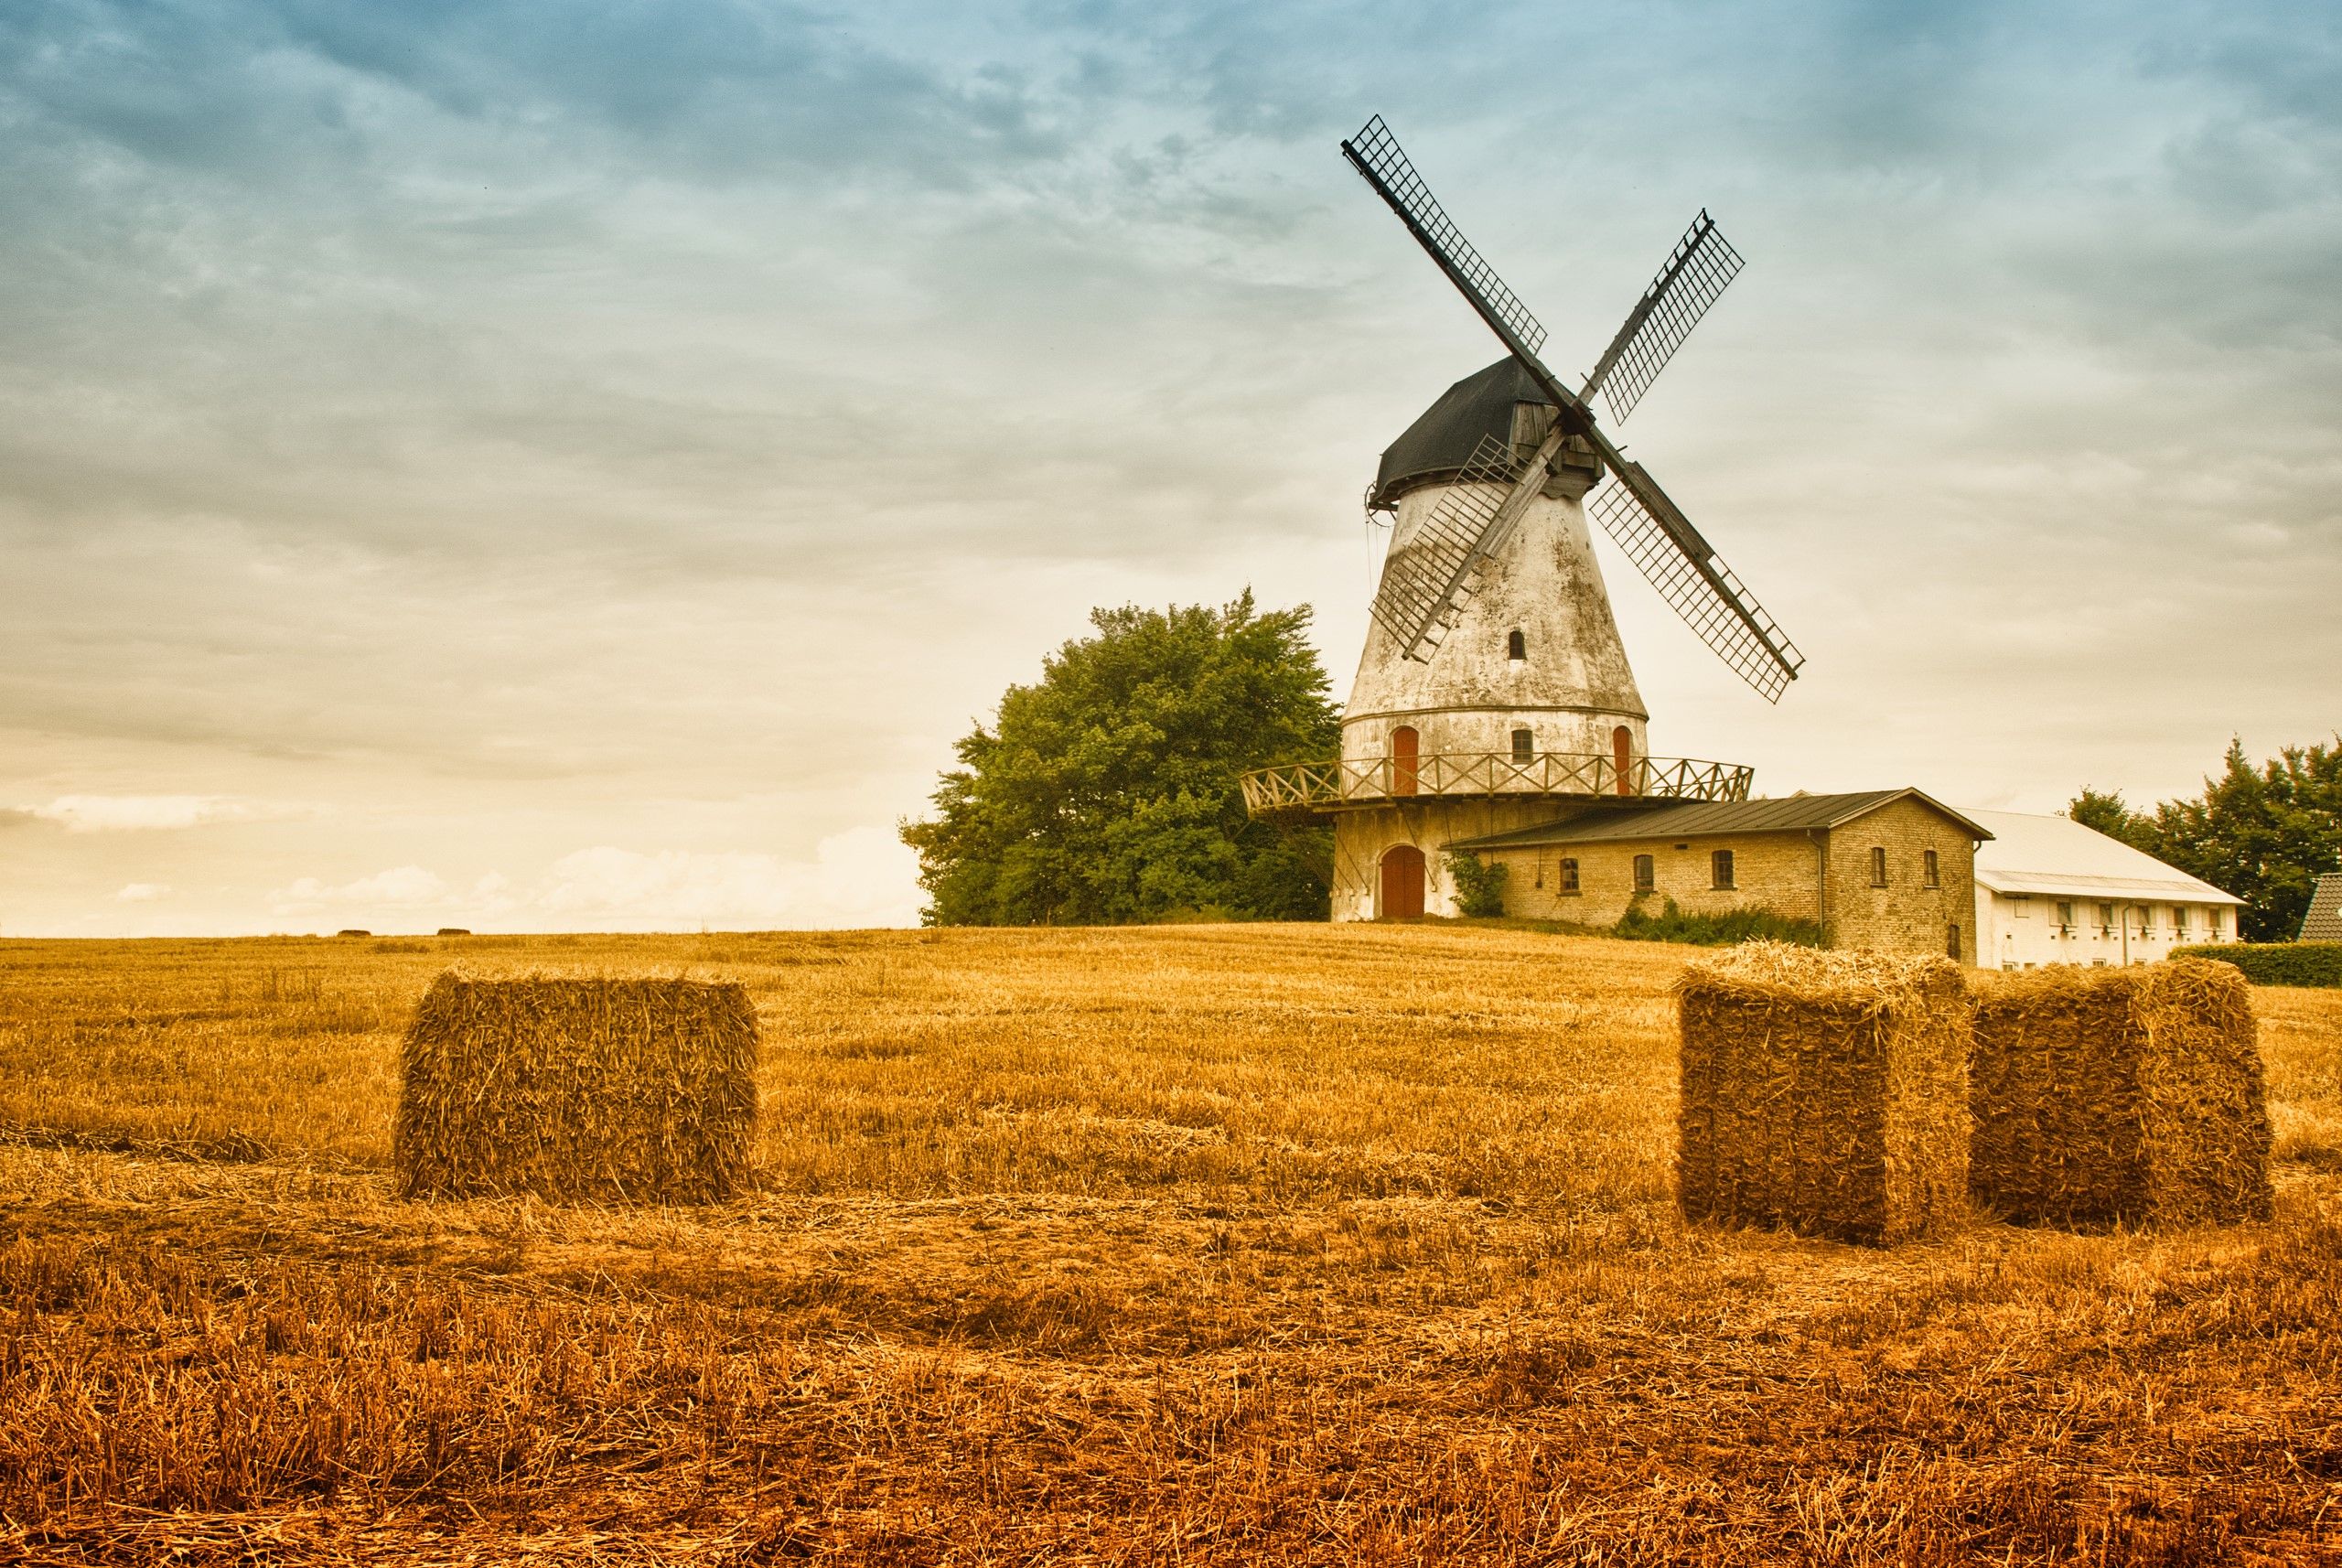 A windmill and hay bales in the middle of an open field - Farm